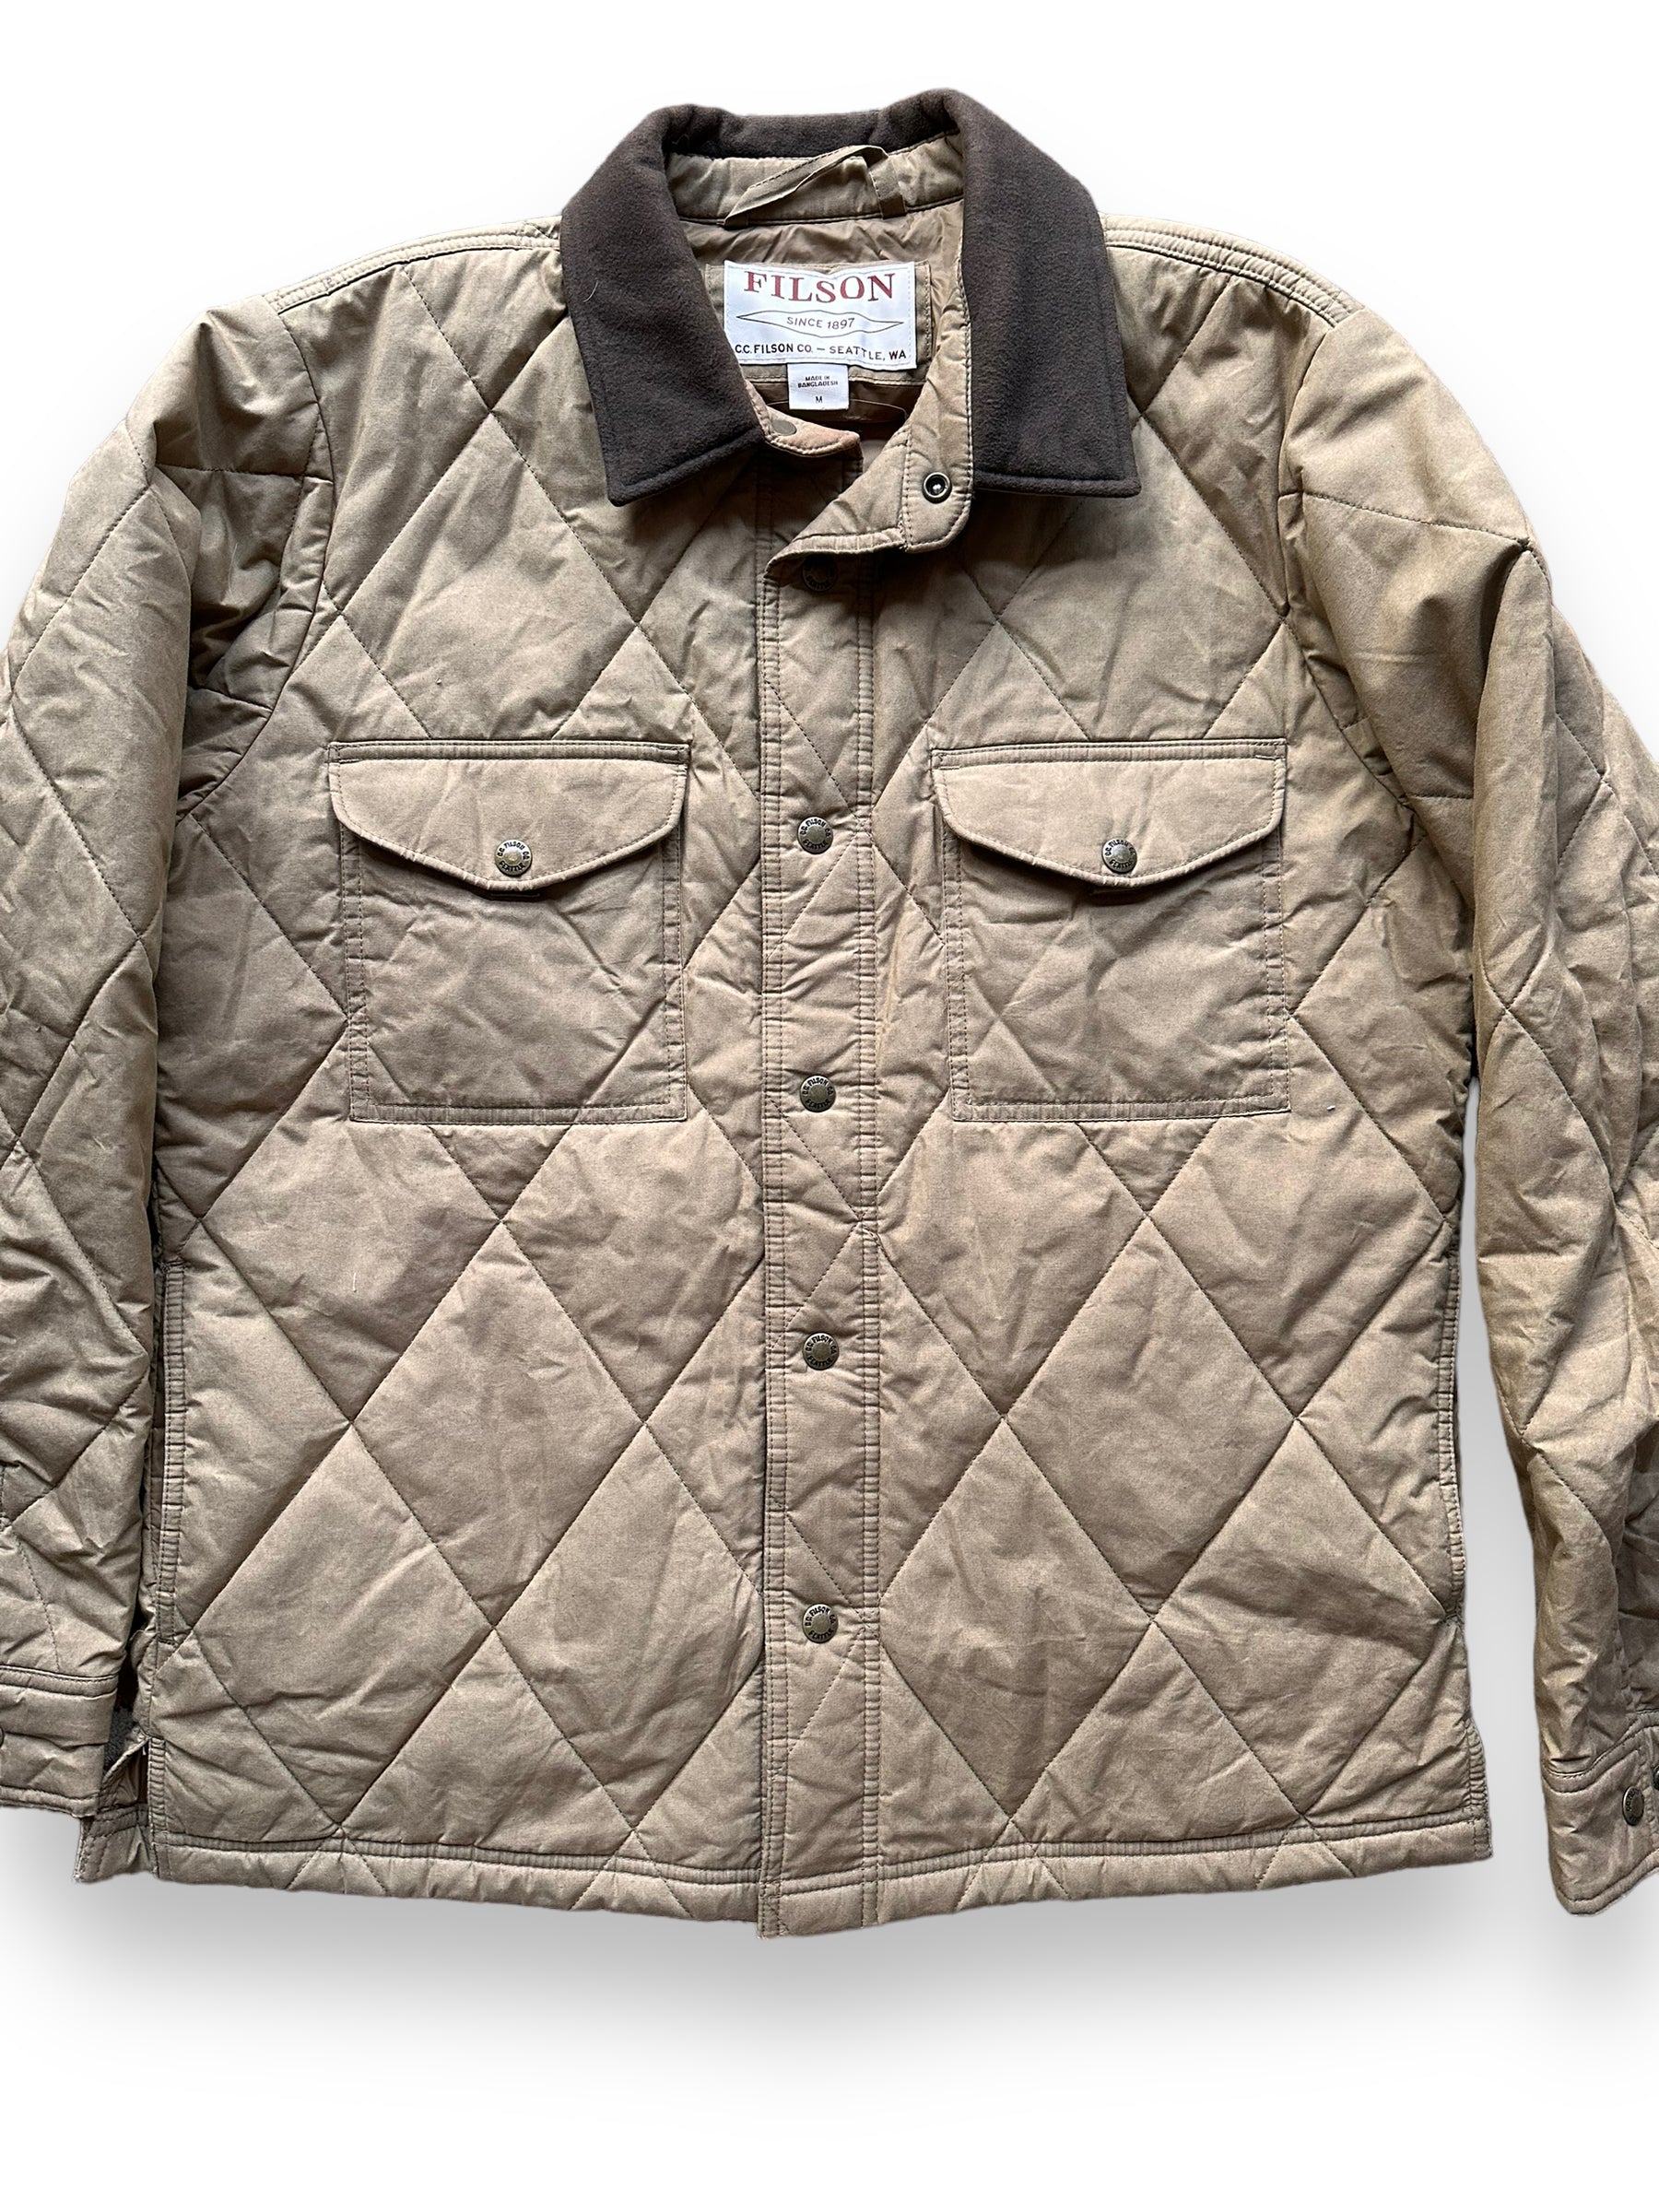 Front Detail View of Filson Hyder Quilted Jac Primaloft Waxed Jacket SZ M |  Barn Owl Vintage Goods | Vintage Filson Workwear Seattle